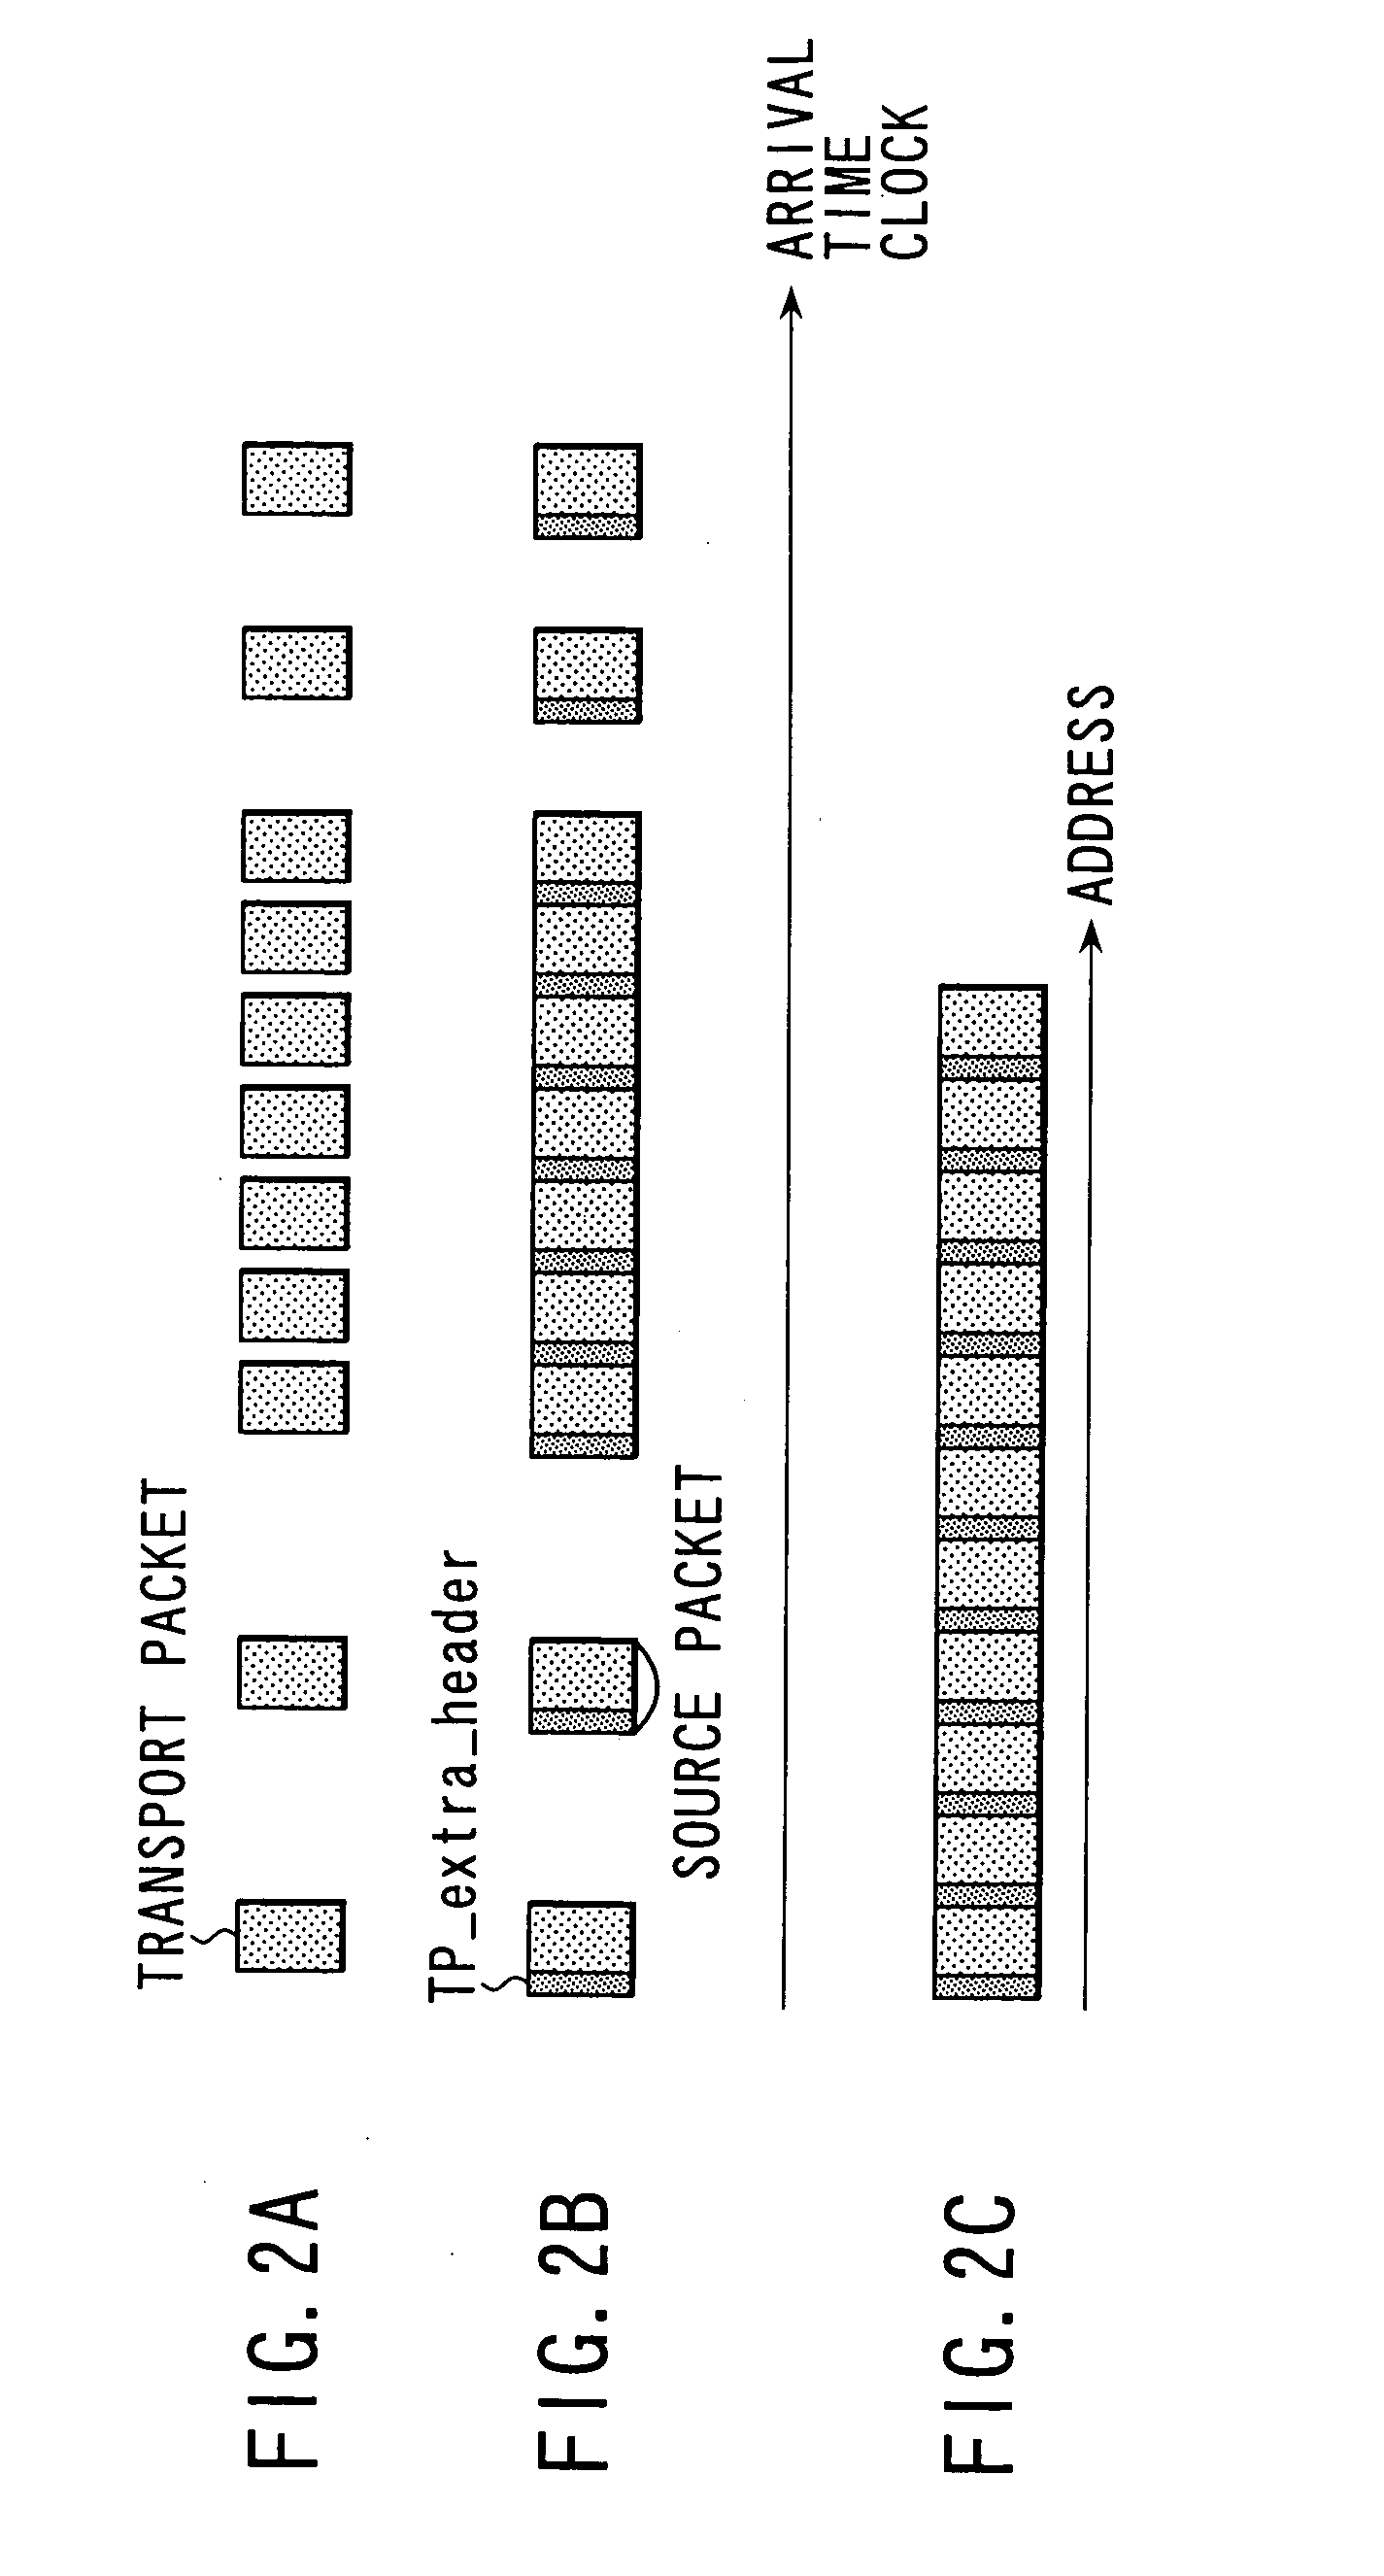 Transport stream processing device, and associated methodology of generating and aligning source data packets in a physical data structure